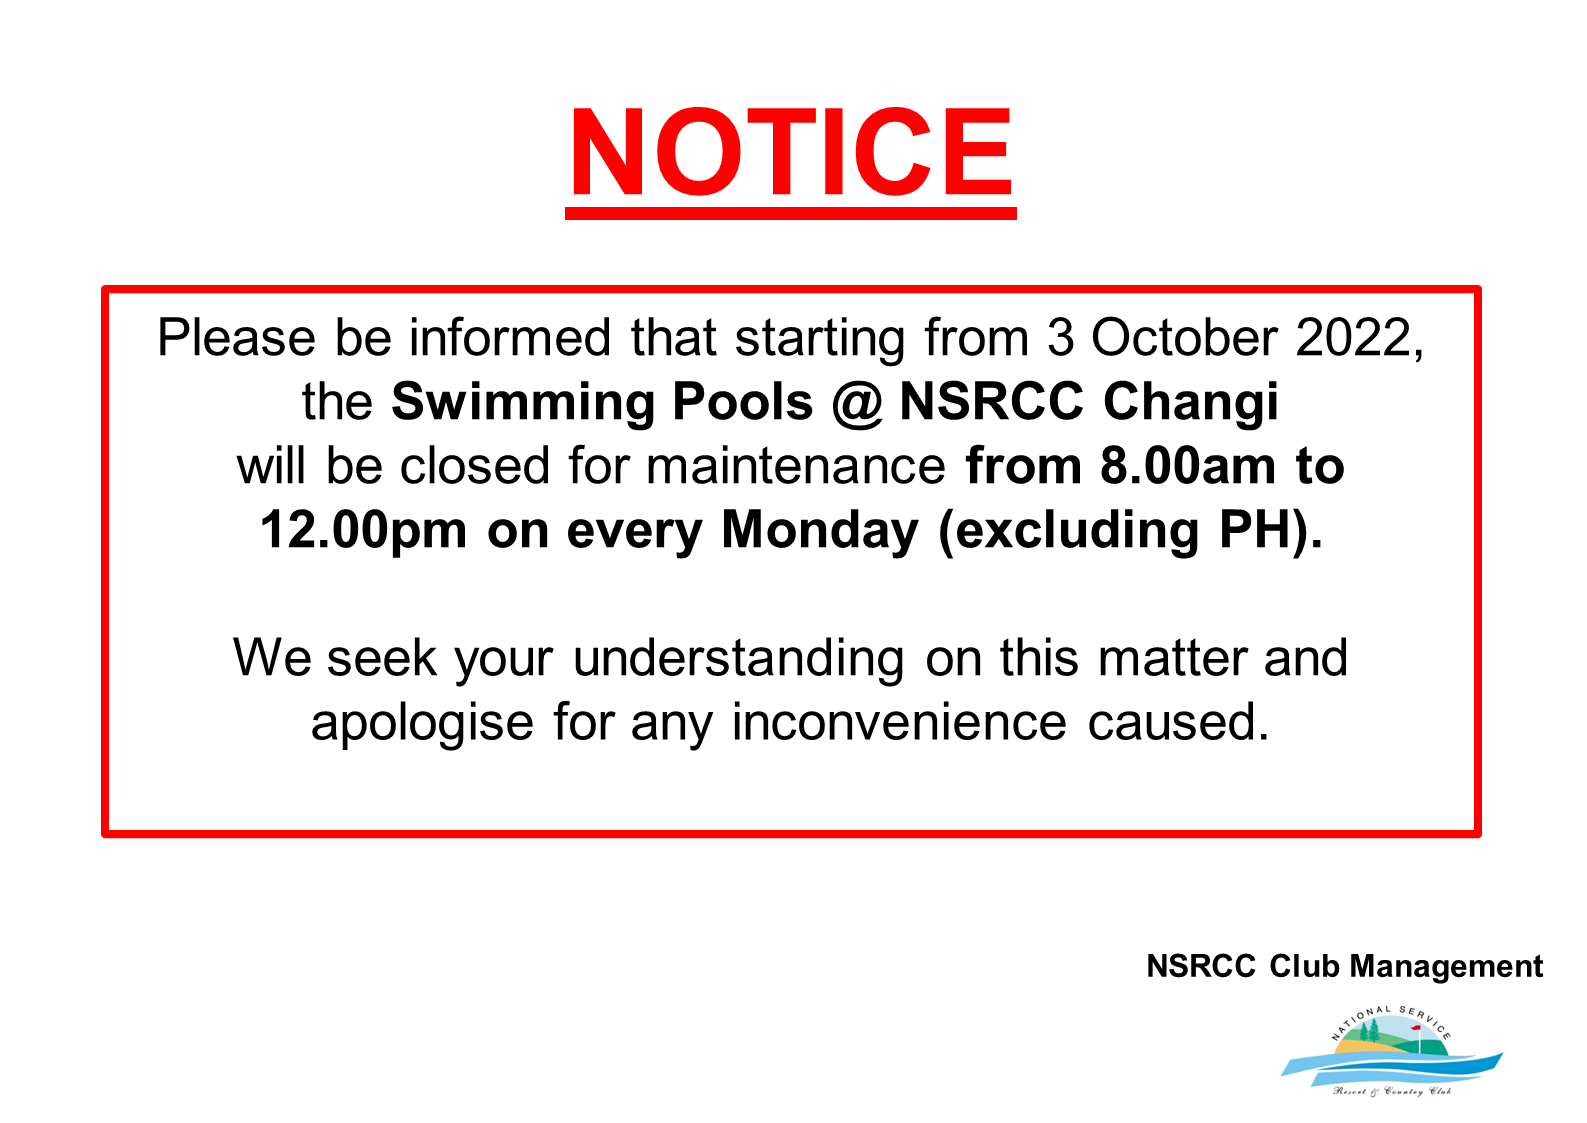 Notice on Weekly Maintenance of Swimming Pools National Service